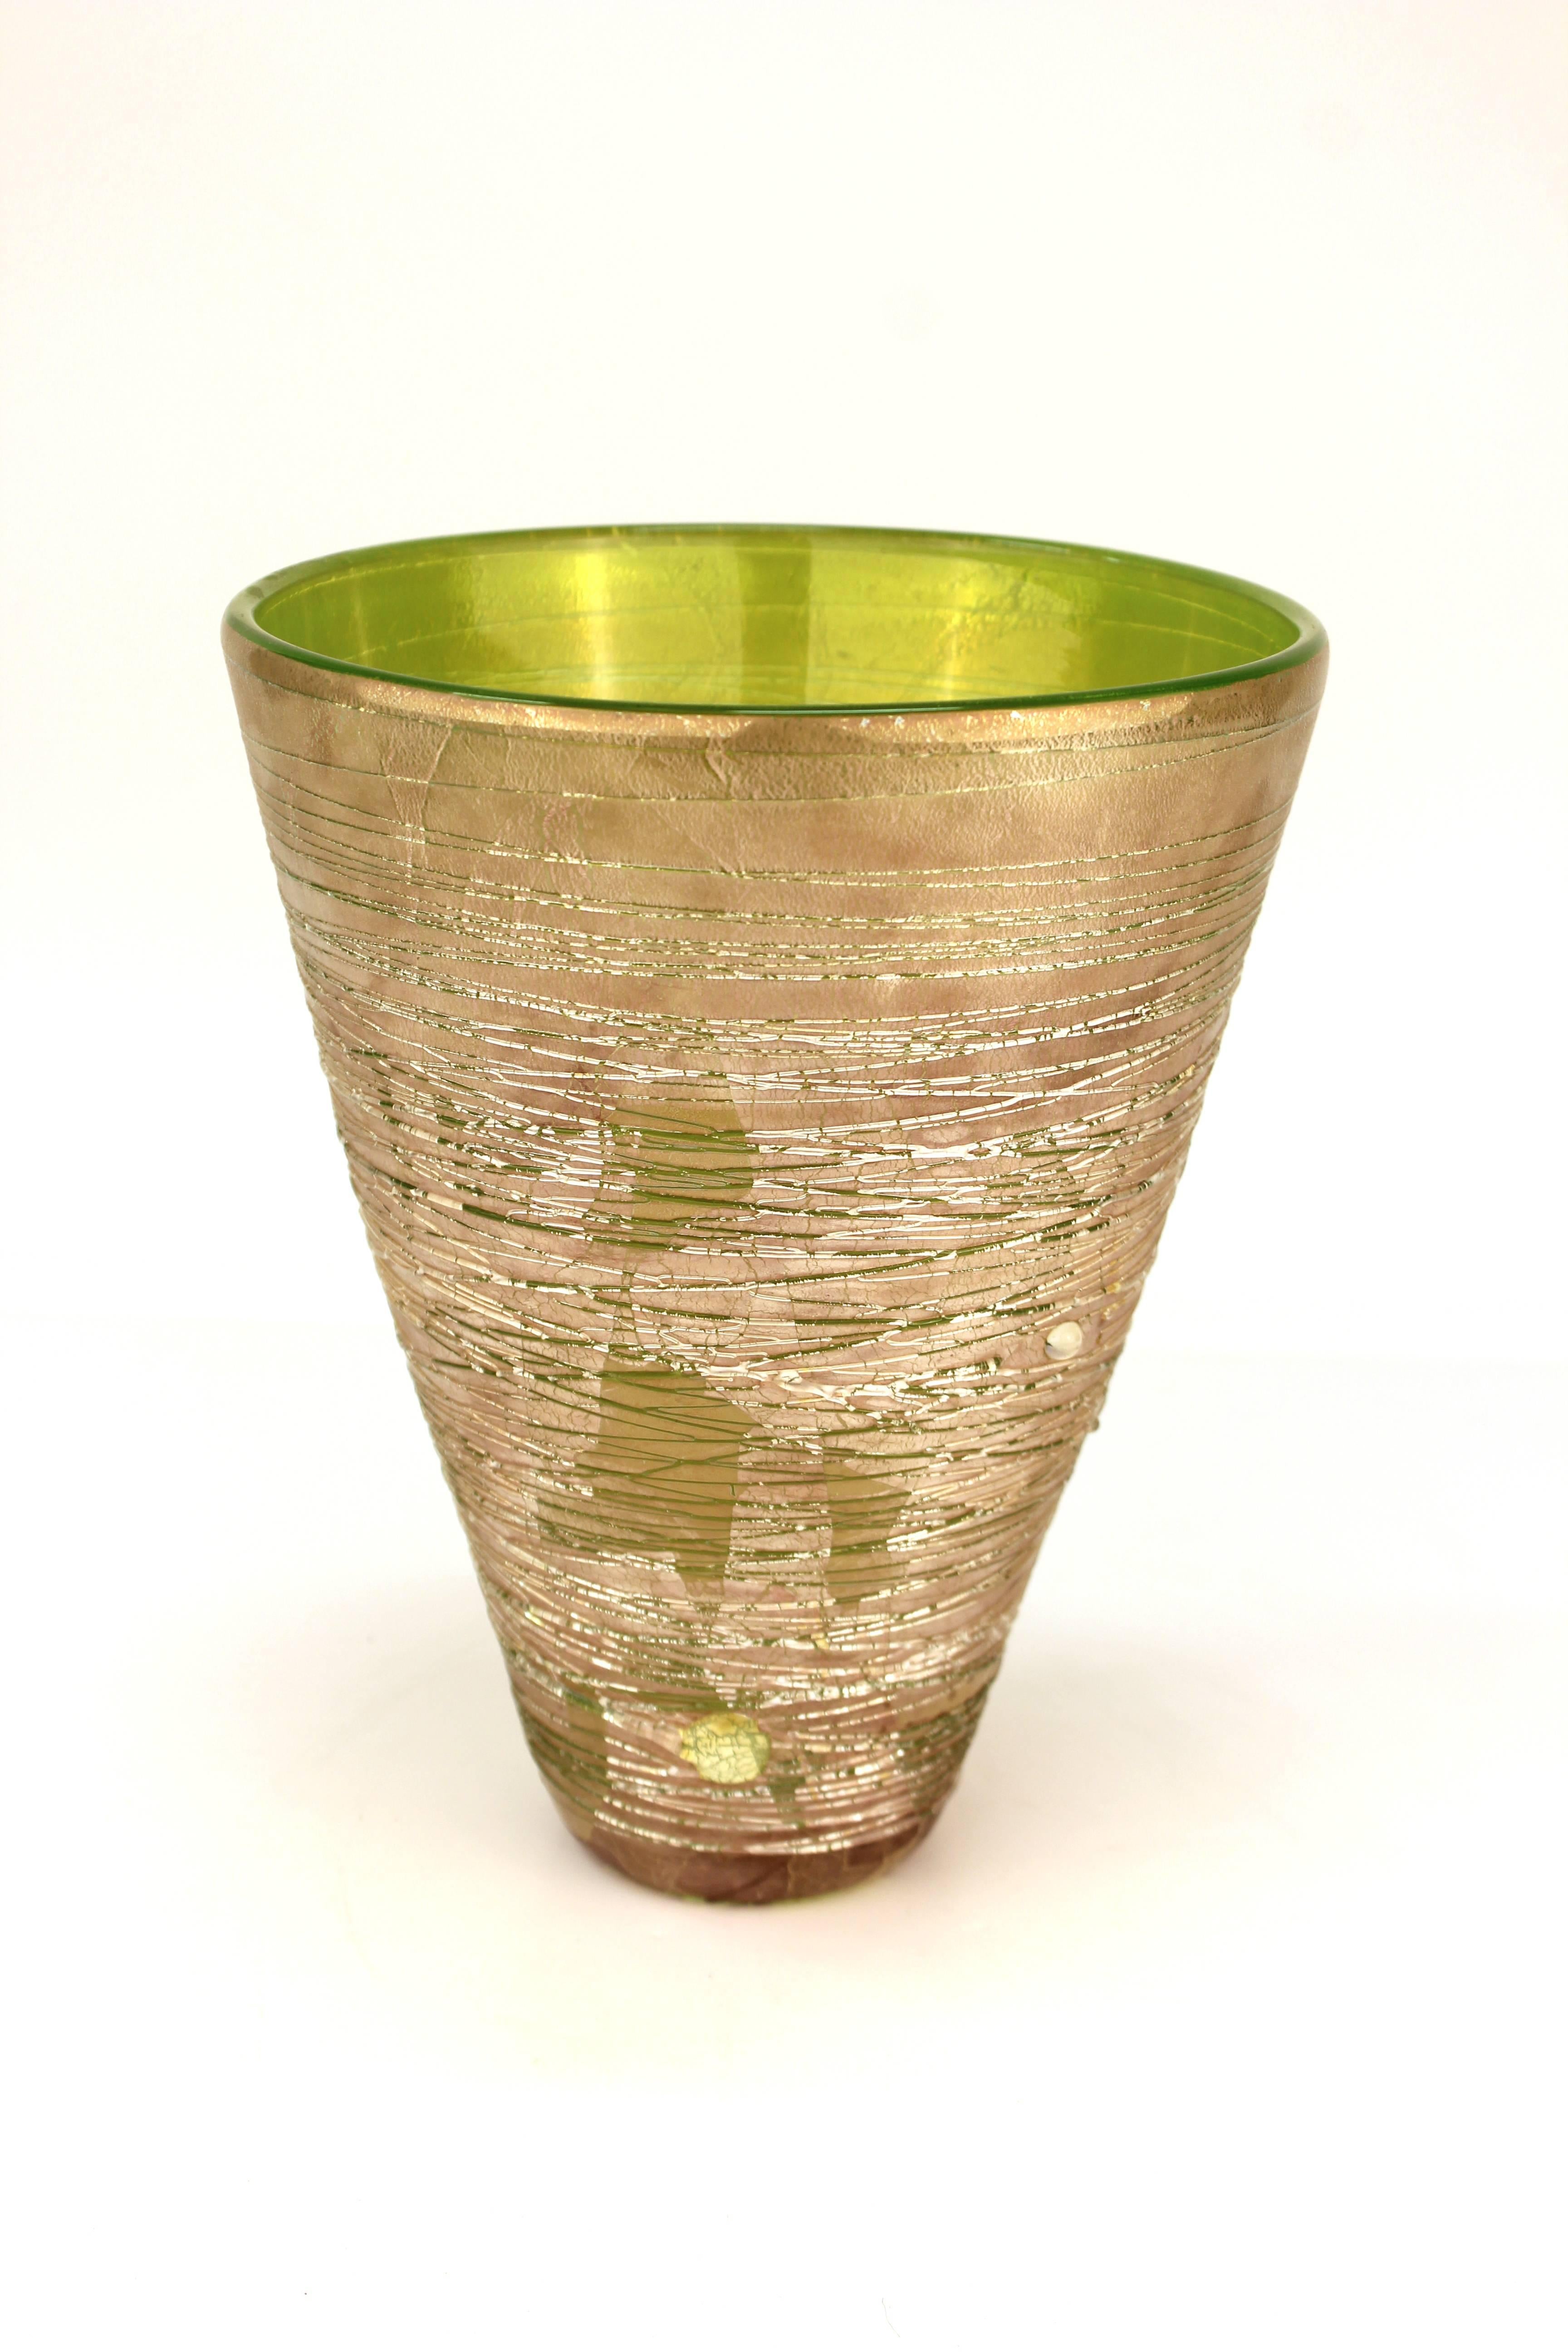 Adam Aaronson for 'The Handmade Glass Co.' British studio art glass vase, made in 1994, signed and dated on the bottom. The piece is in great vintage condition.